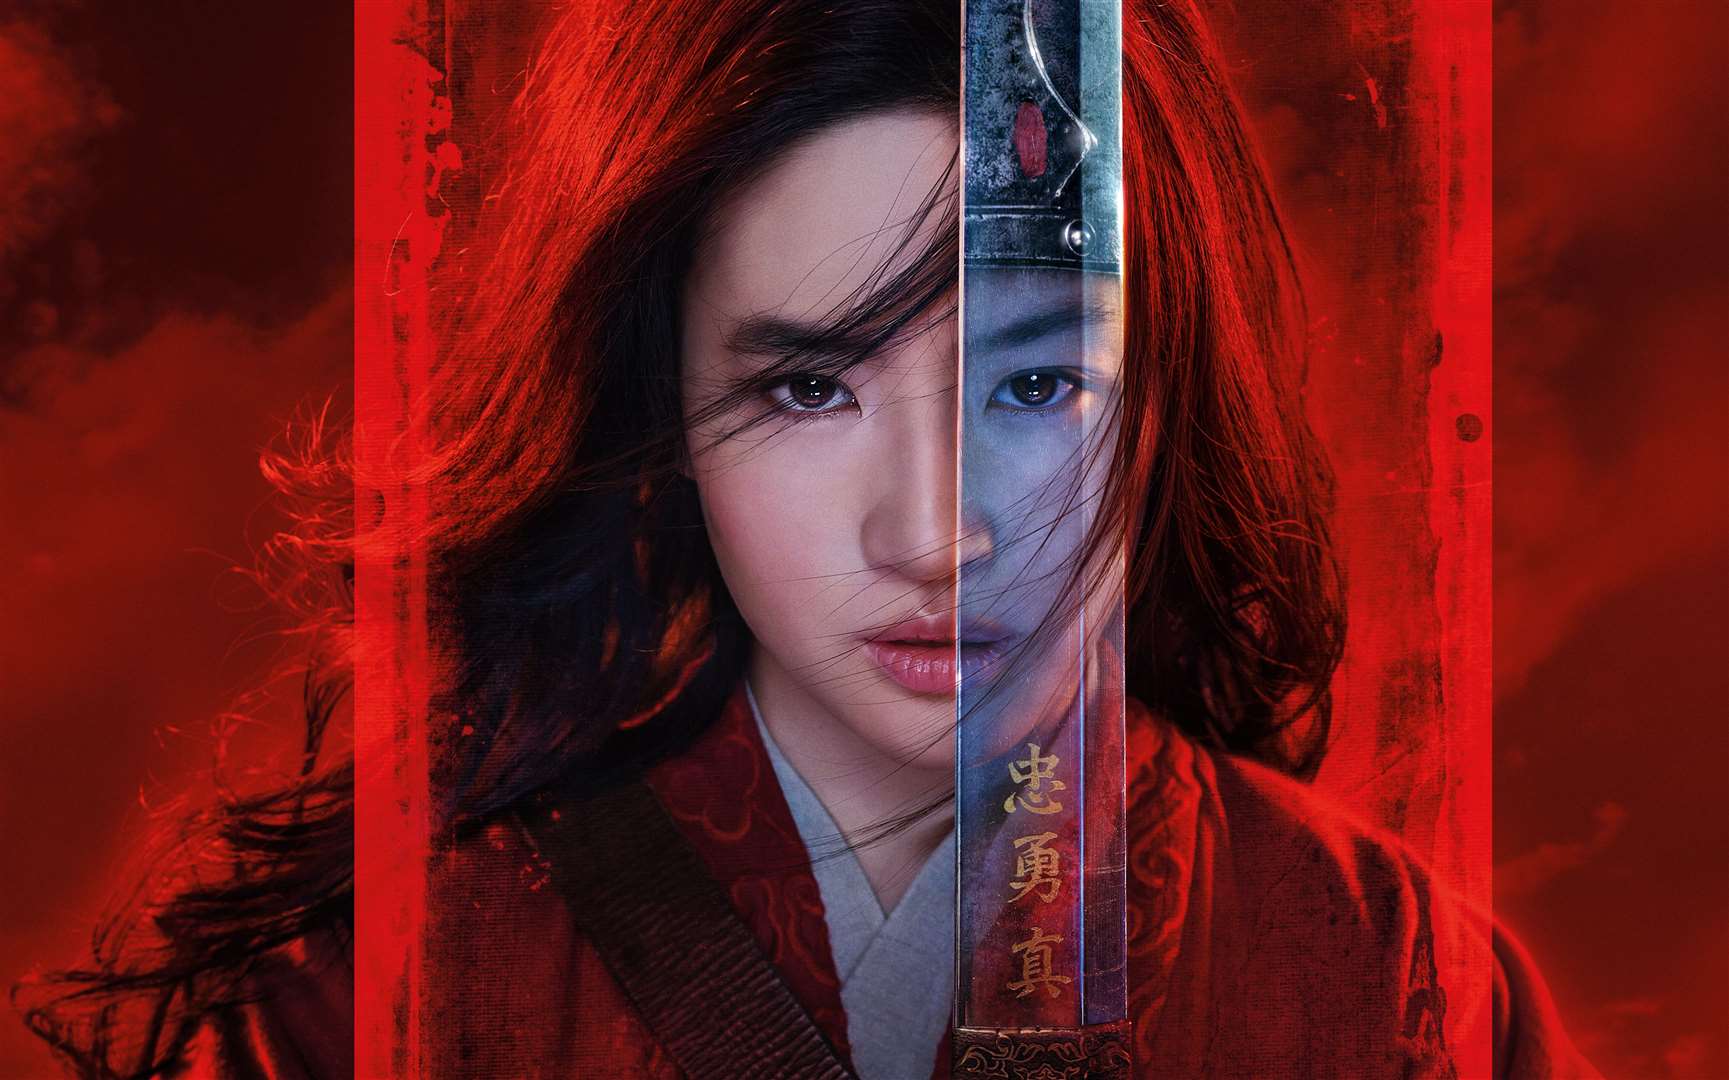 Disney's Mulan is due out in July